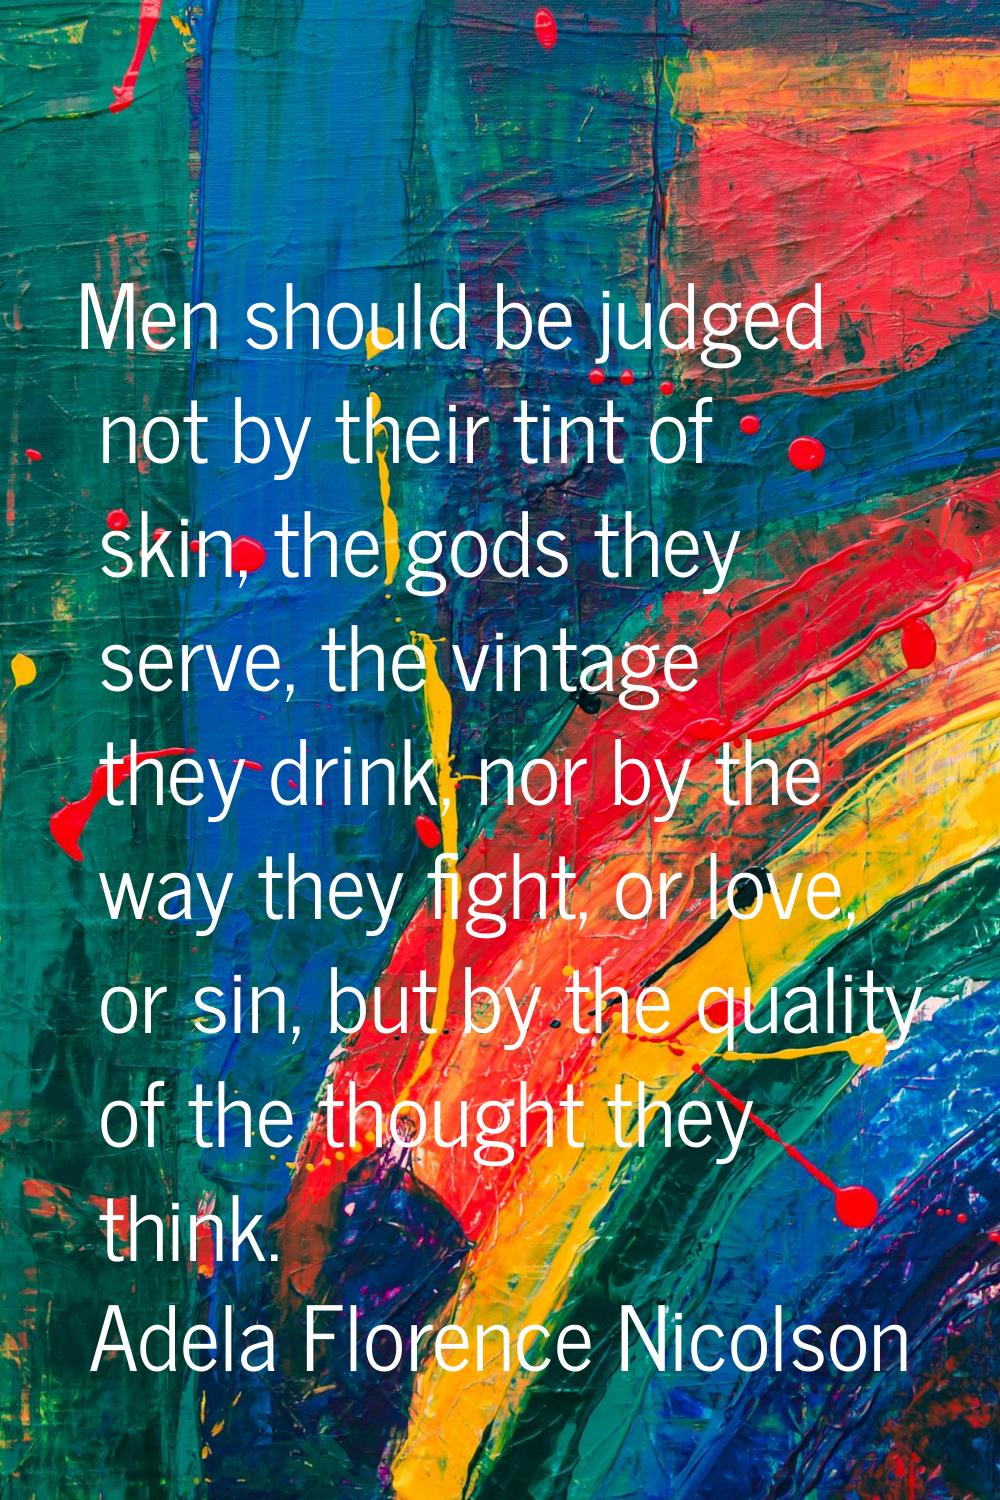 Men should be judged not by their tint of skin, the gods they serve, the vintage they drink, nor by